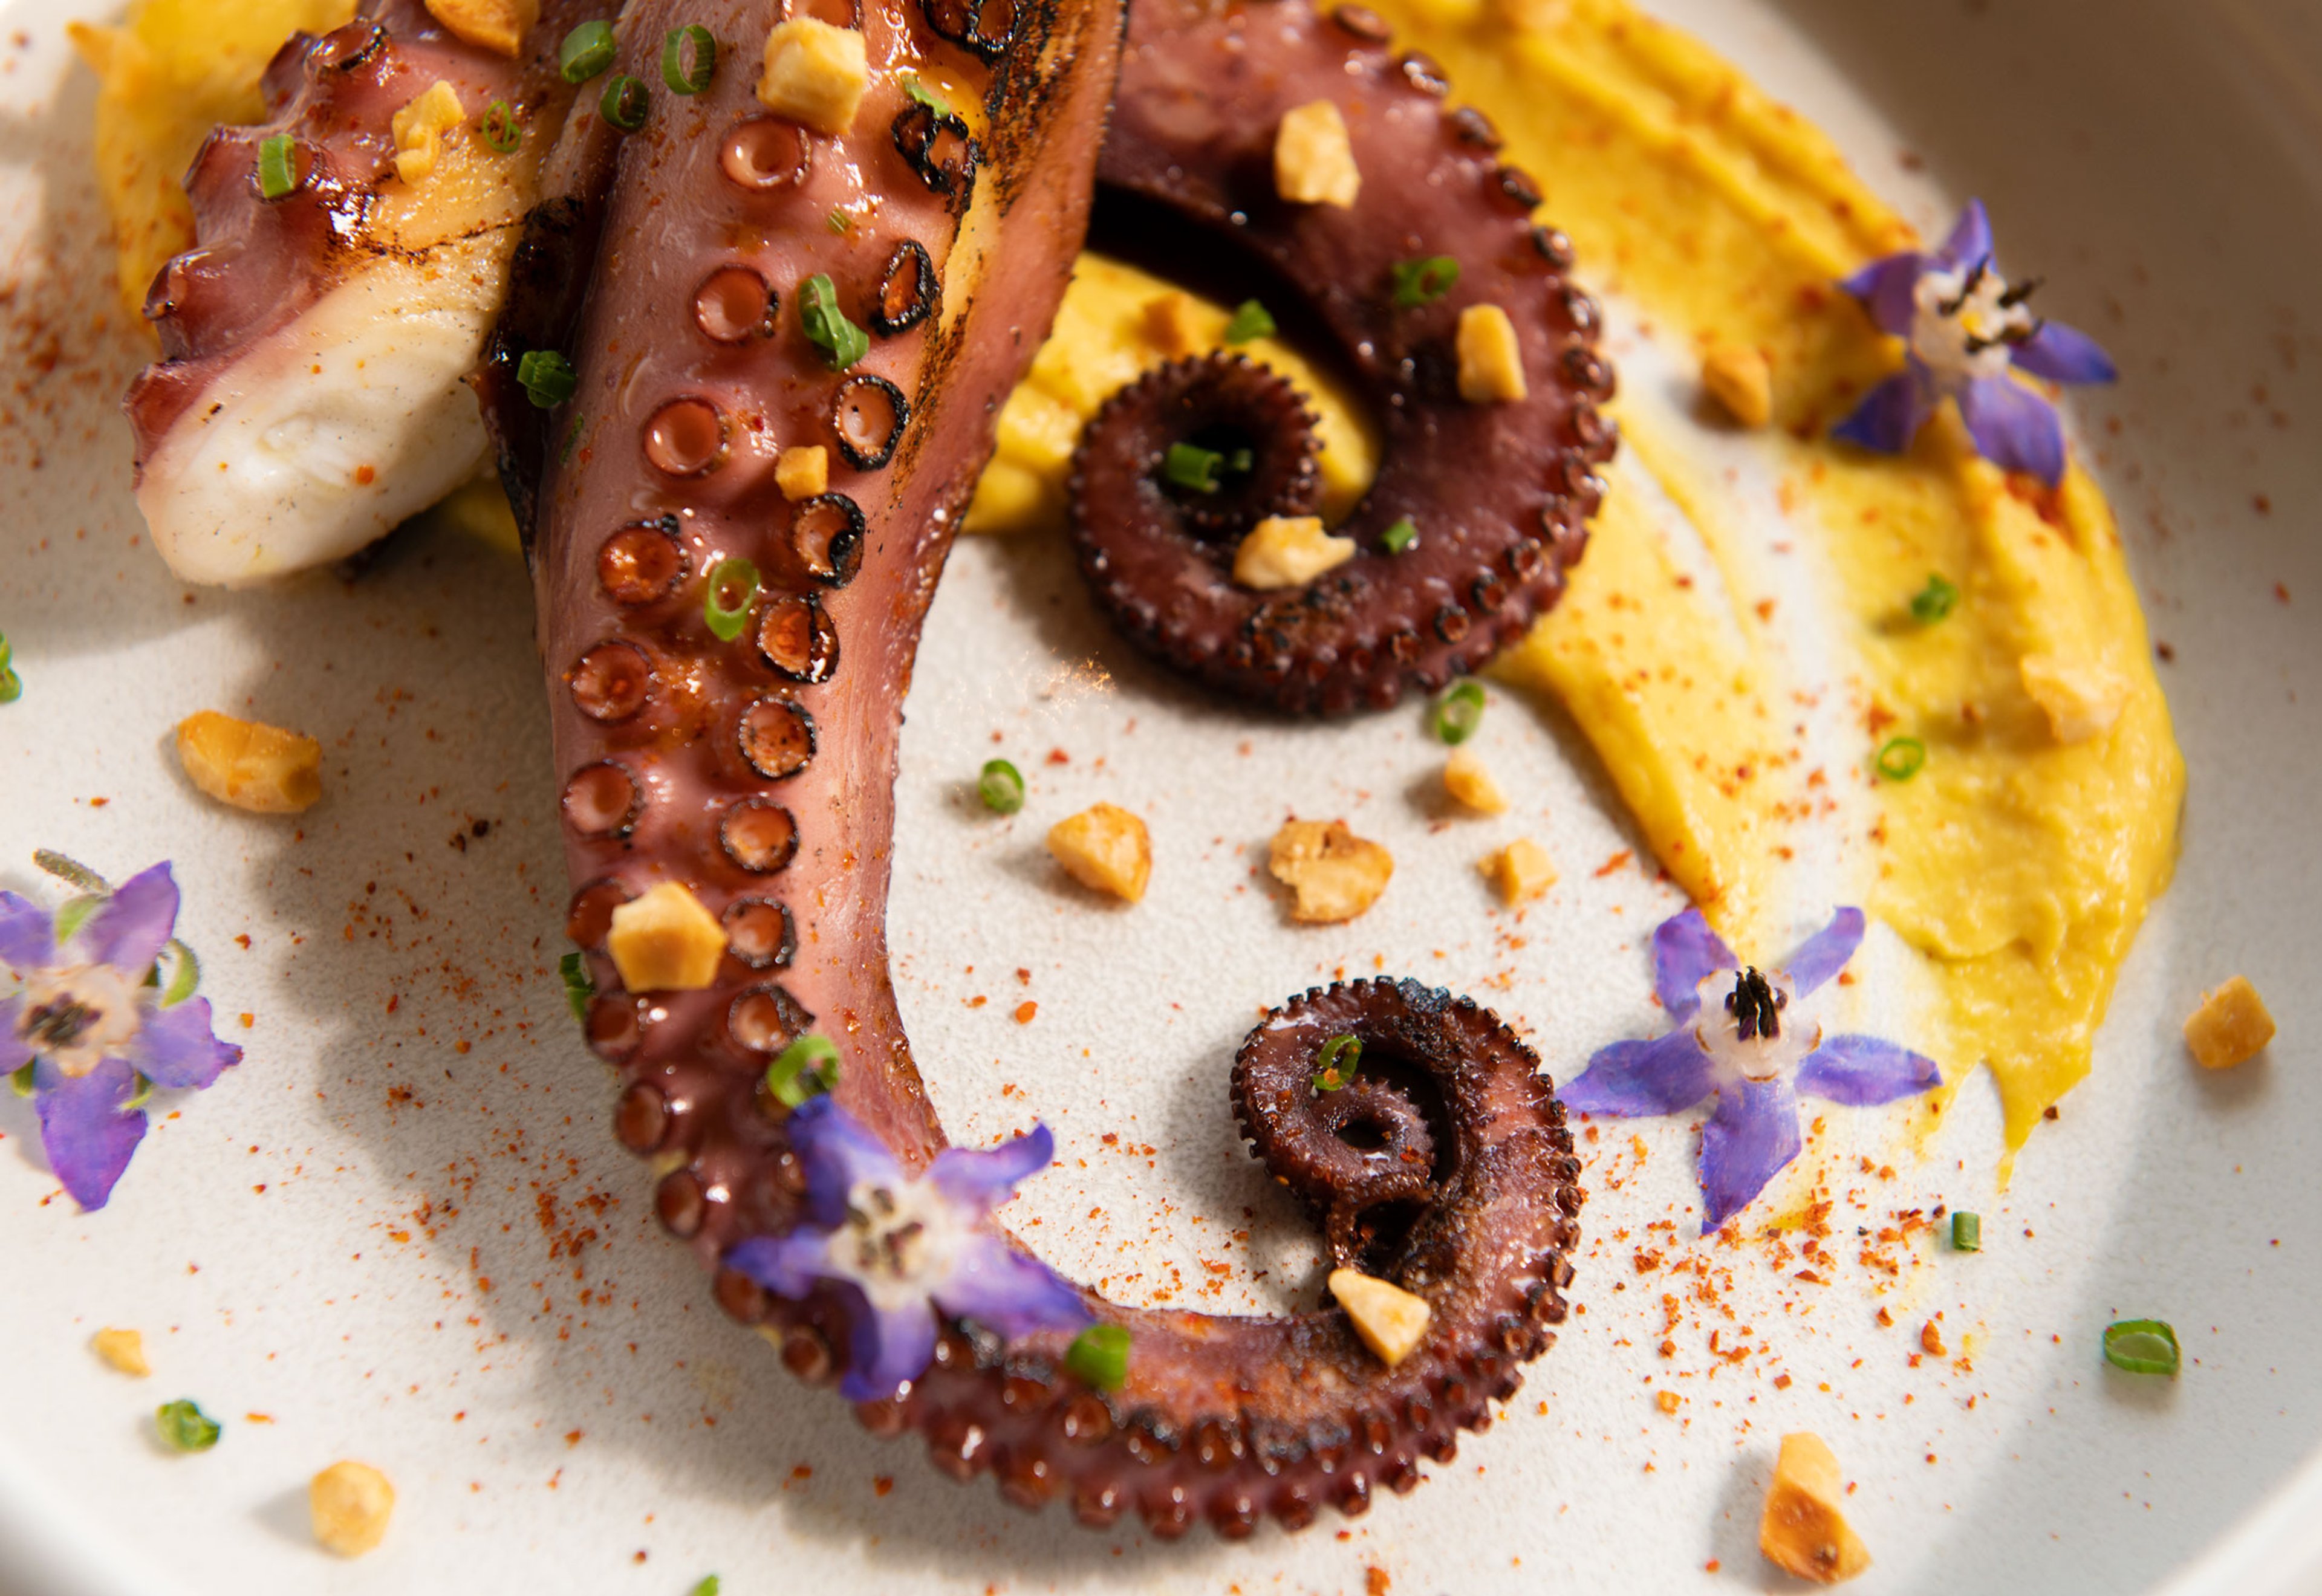 A fresh-looking octopus dish